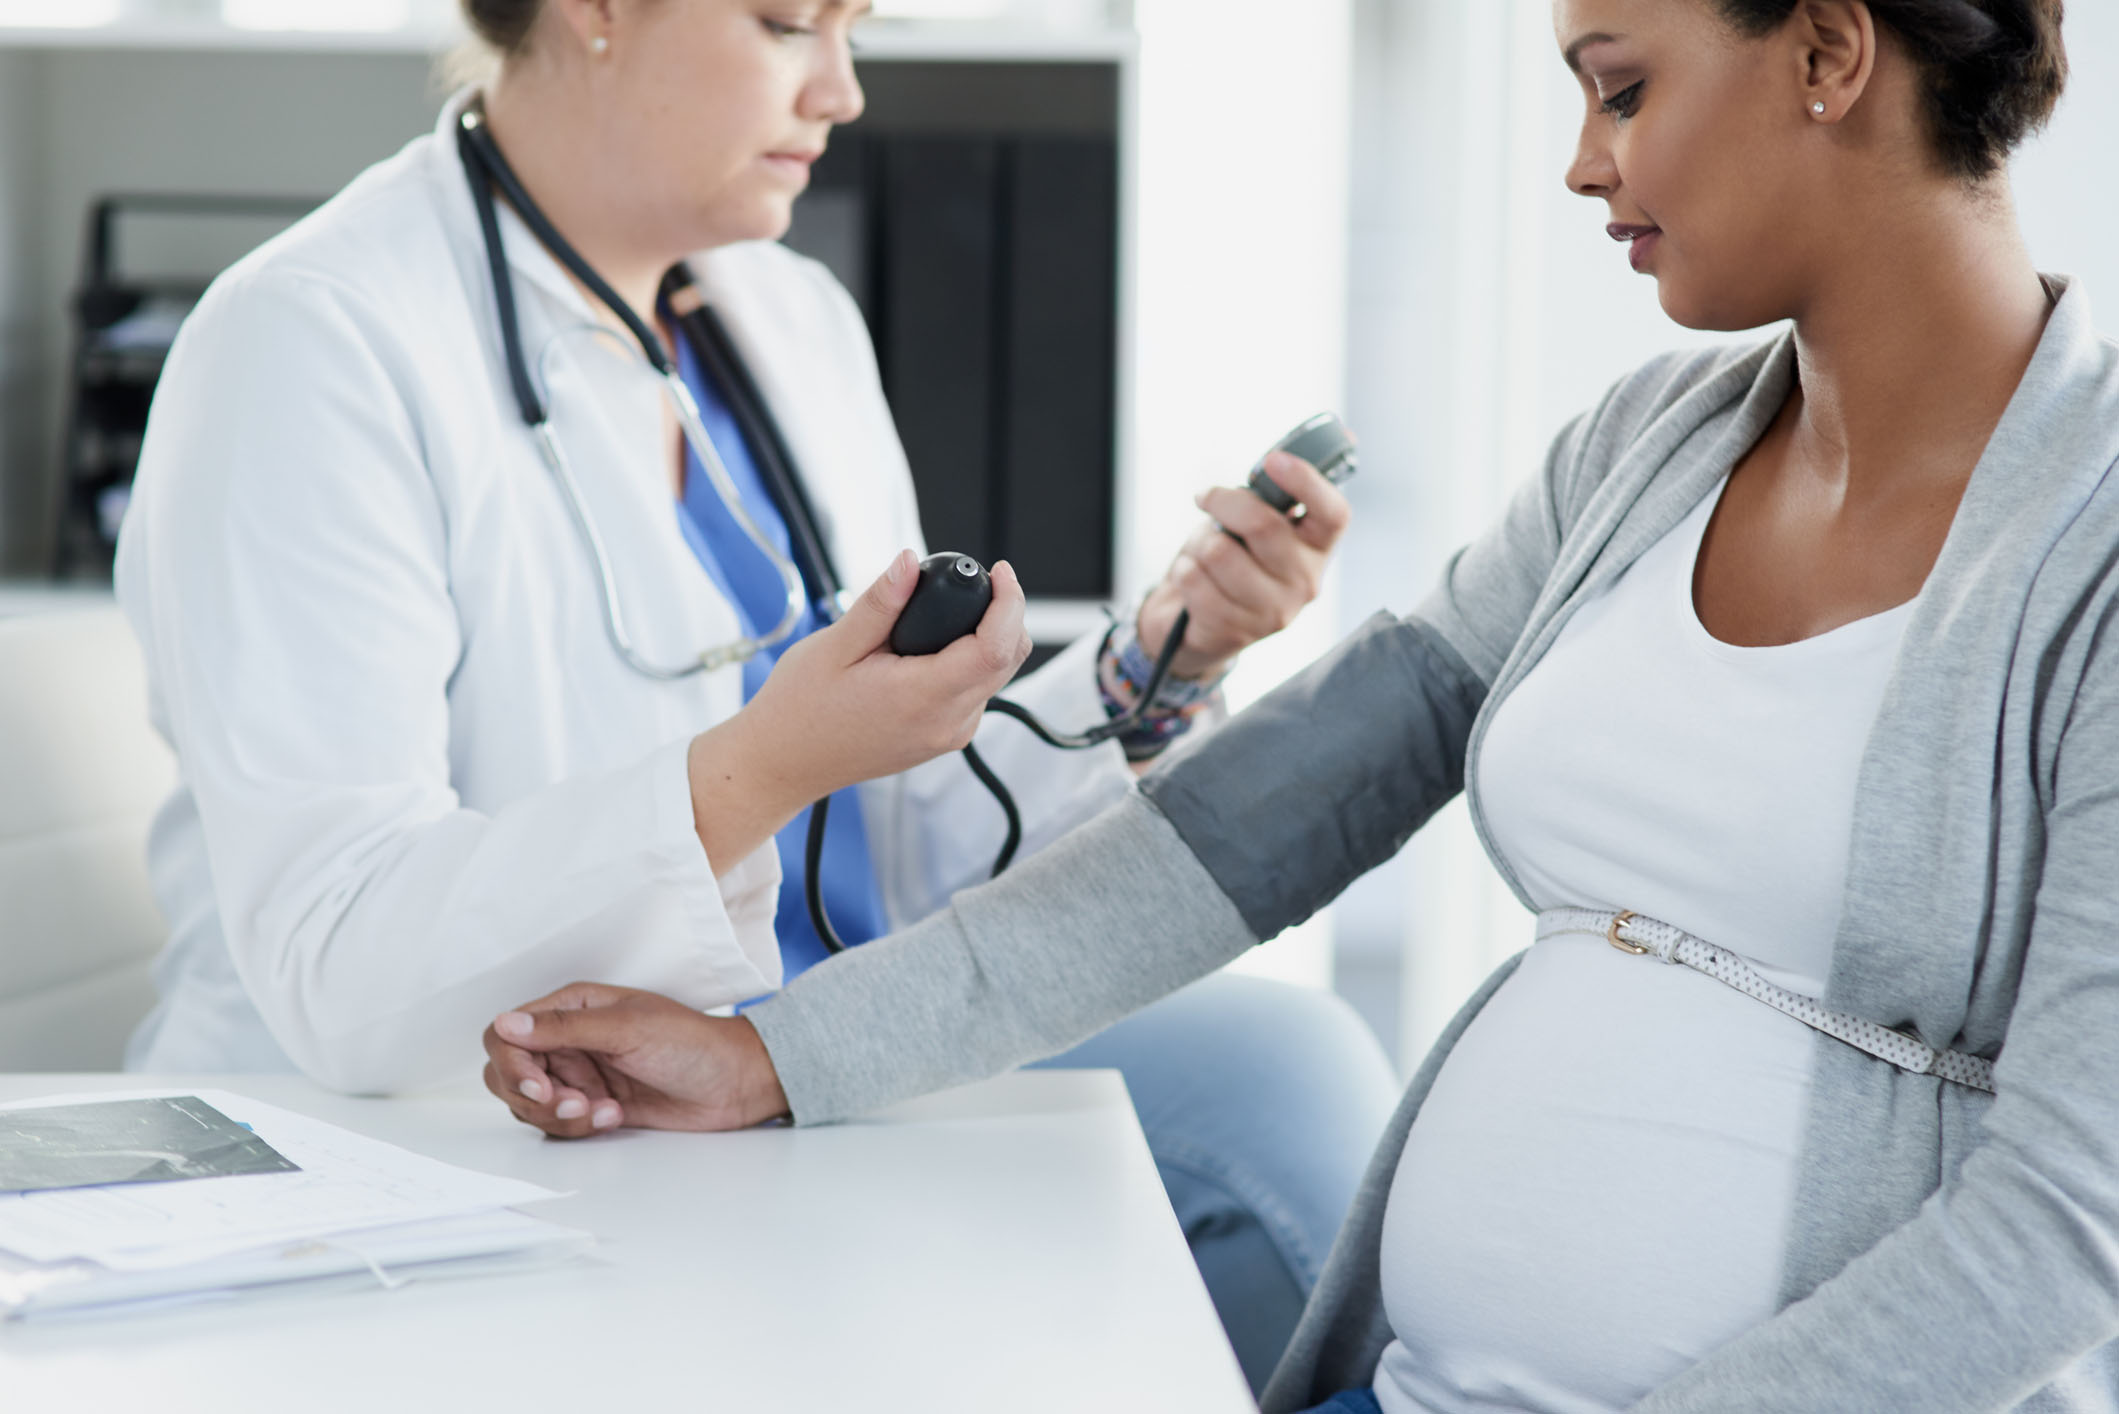 A female doctor takes the blood pressure of a pregnant patient